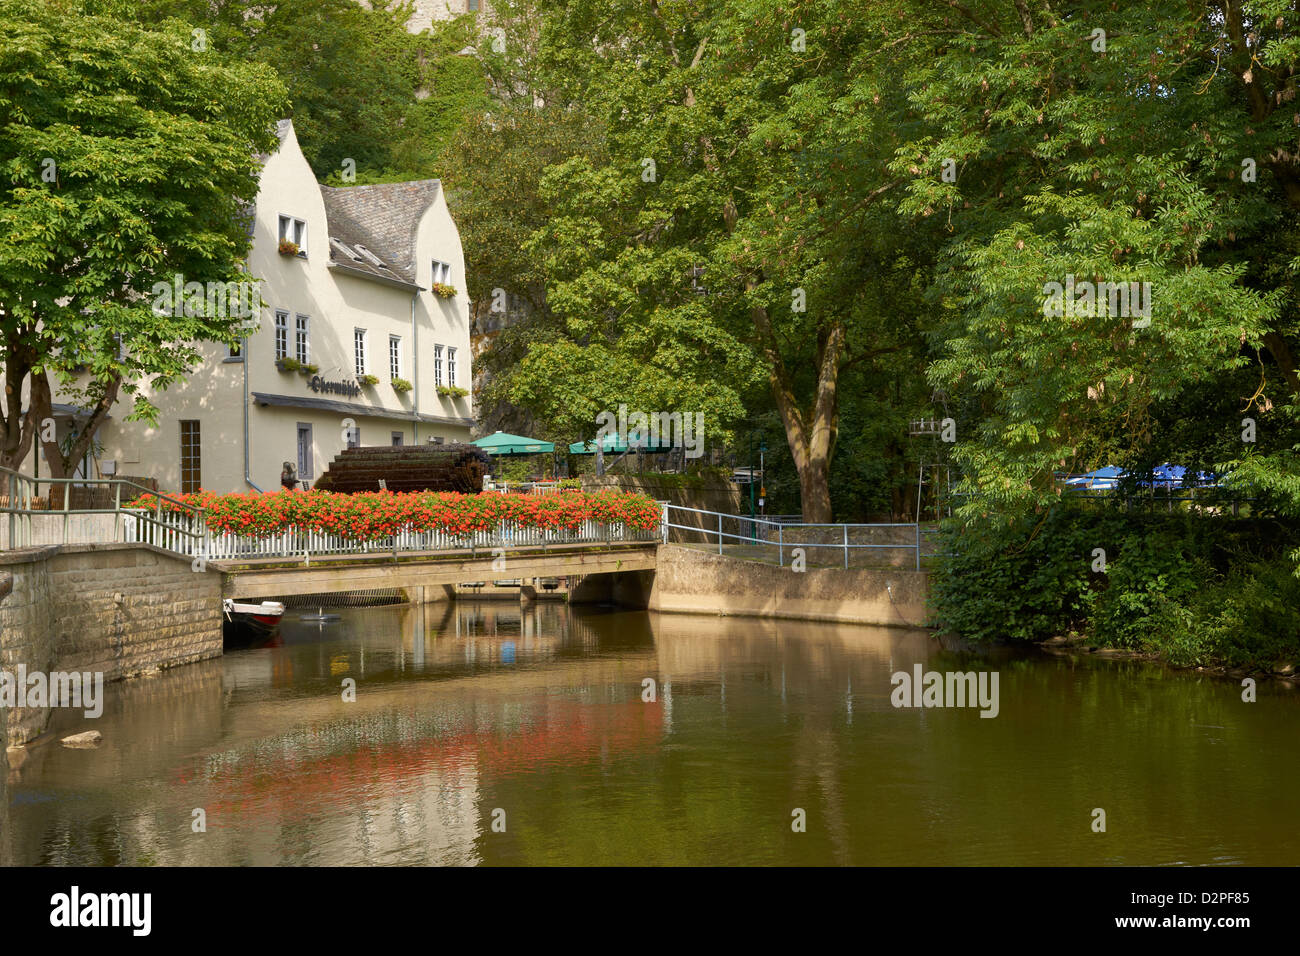 Summer on the bank of the Lahn river Stock Photo